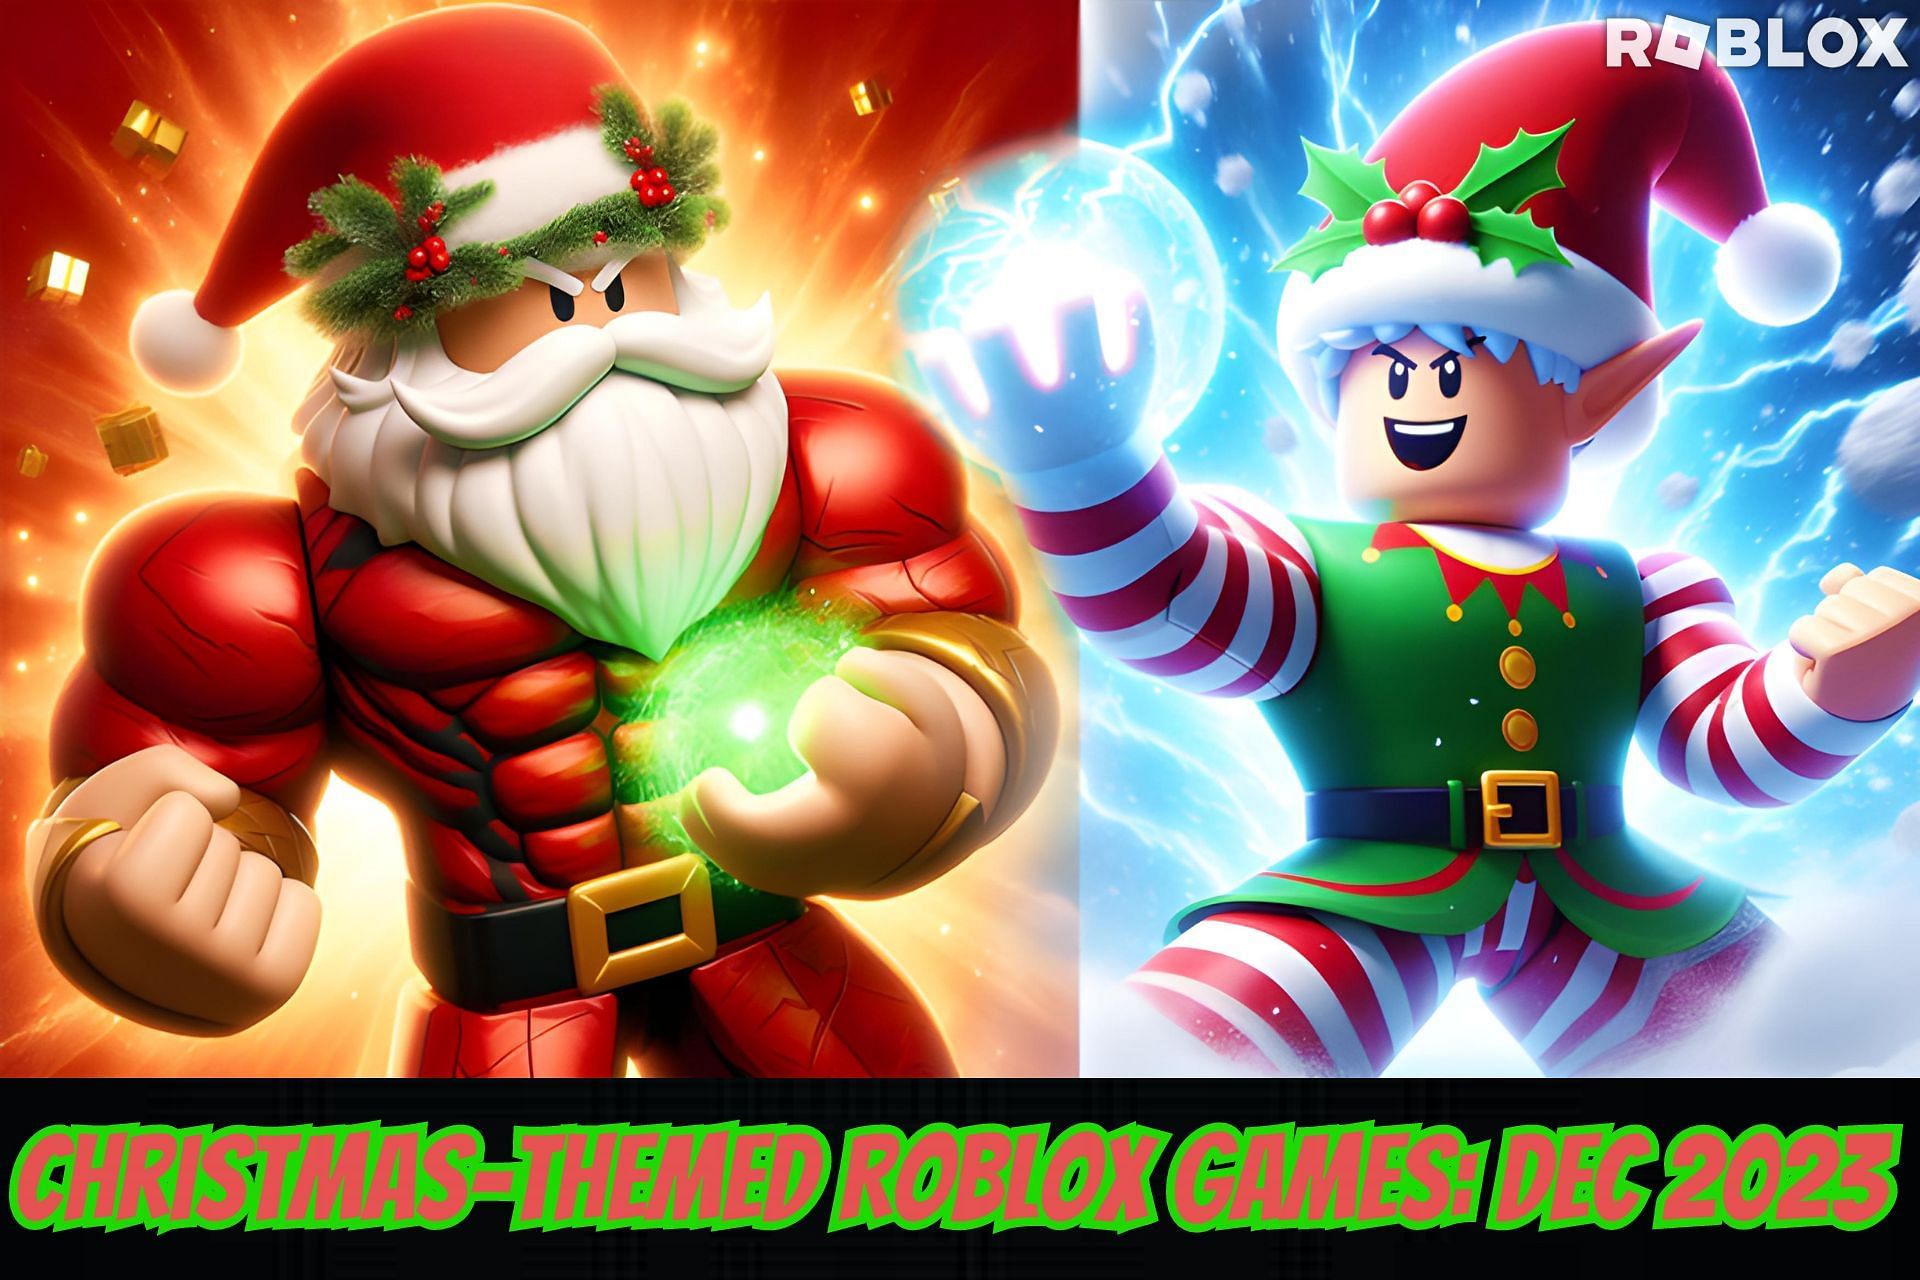 5 best Roblox games to play in December 2023